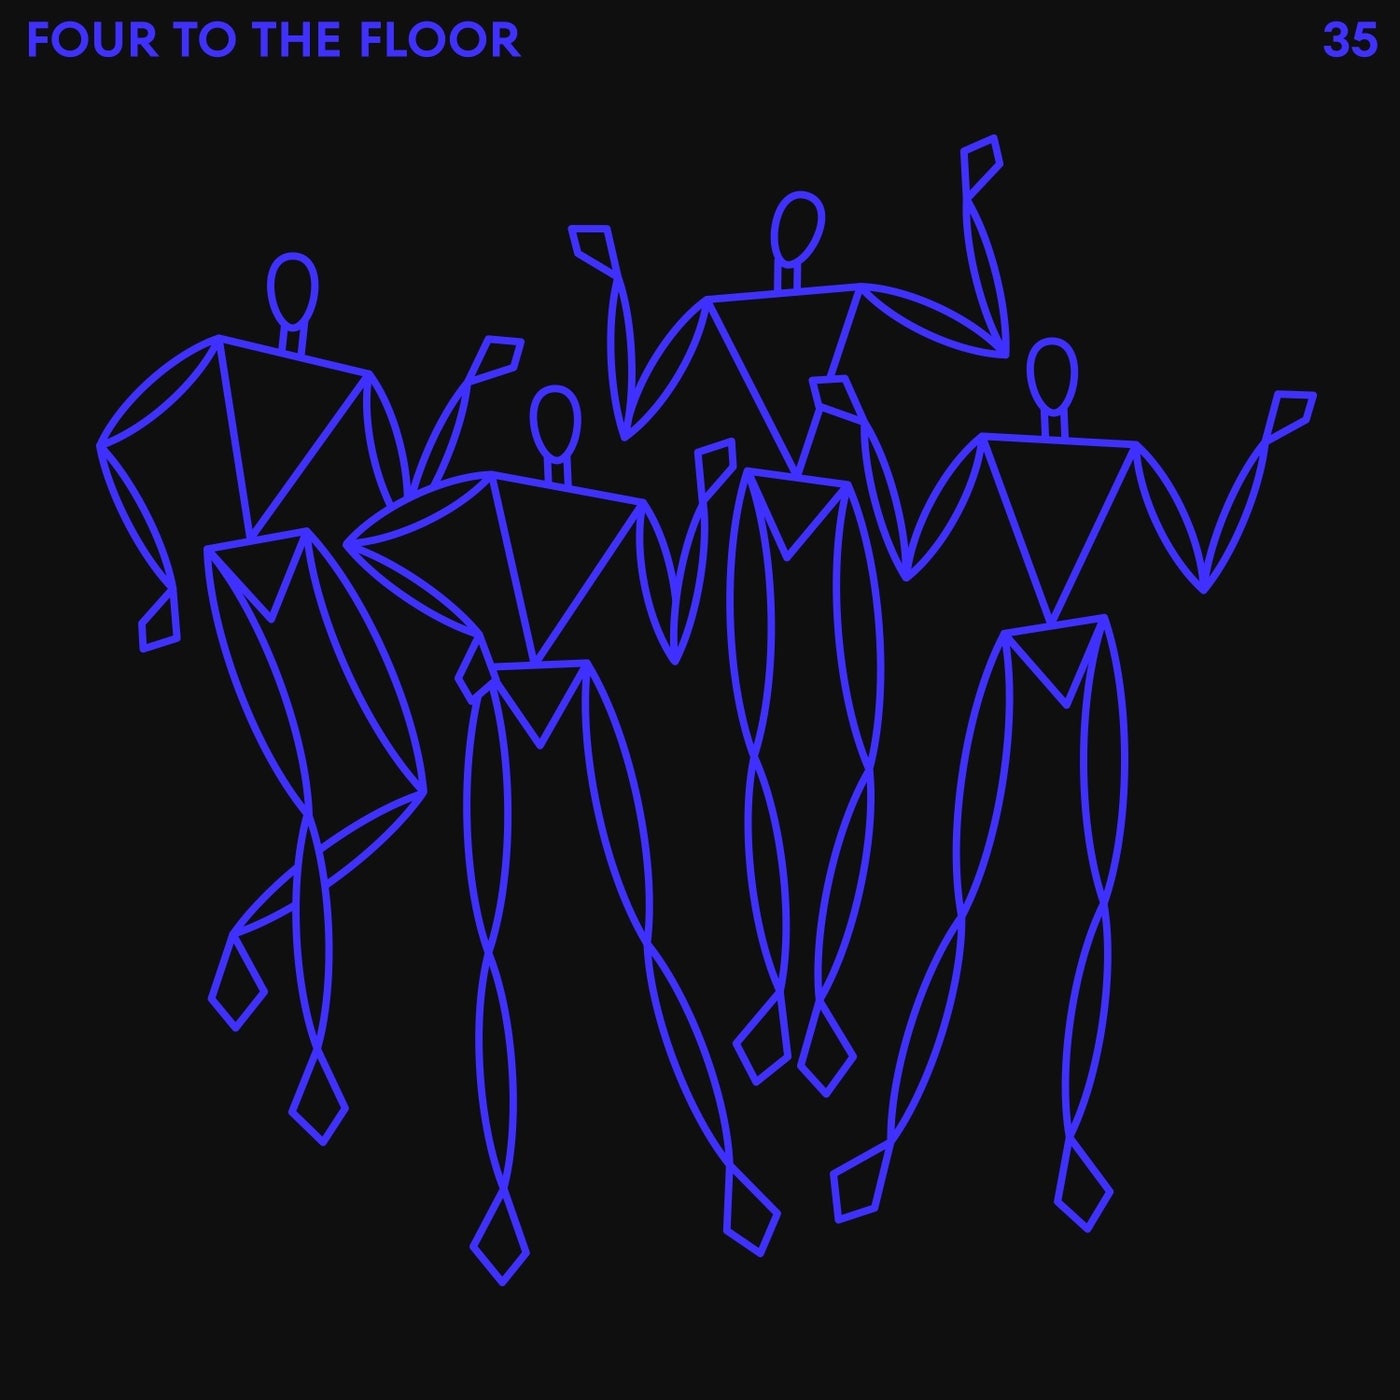 image cover: VA - Four To The Floor 35 on Diynamic